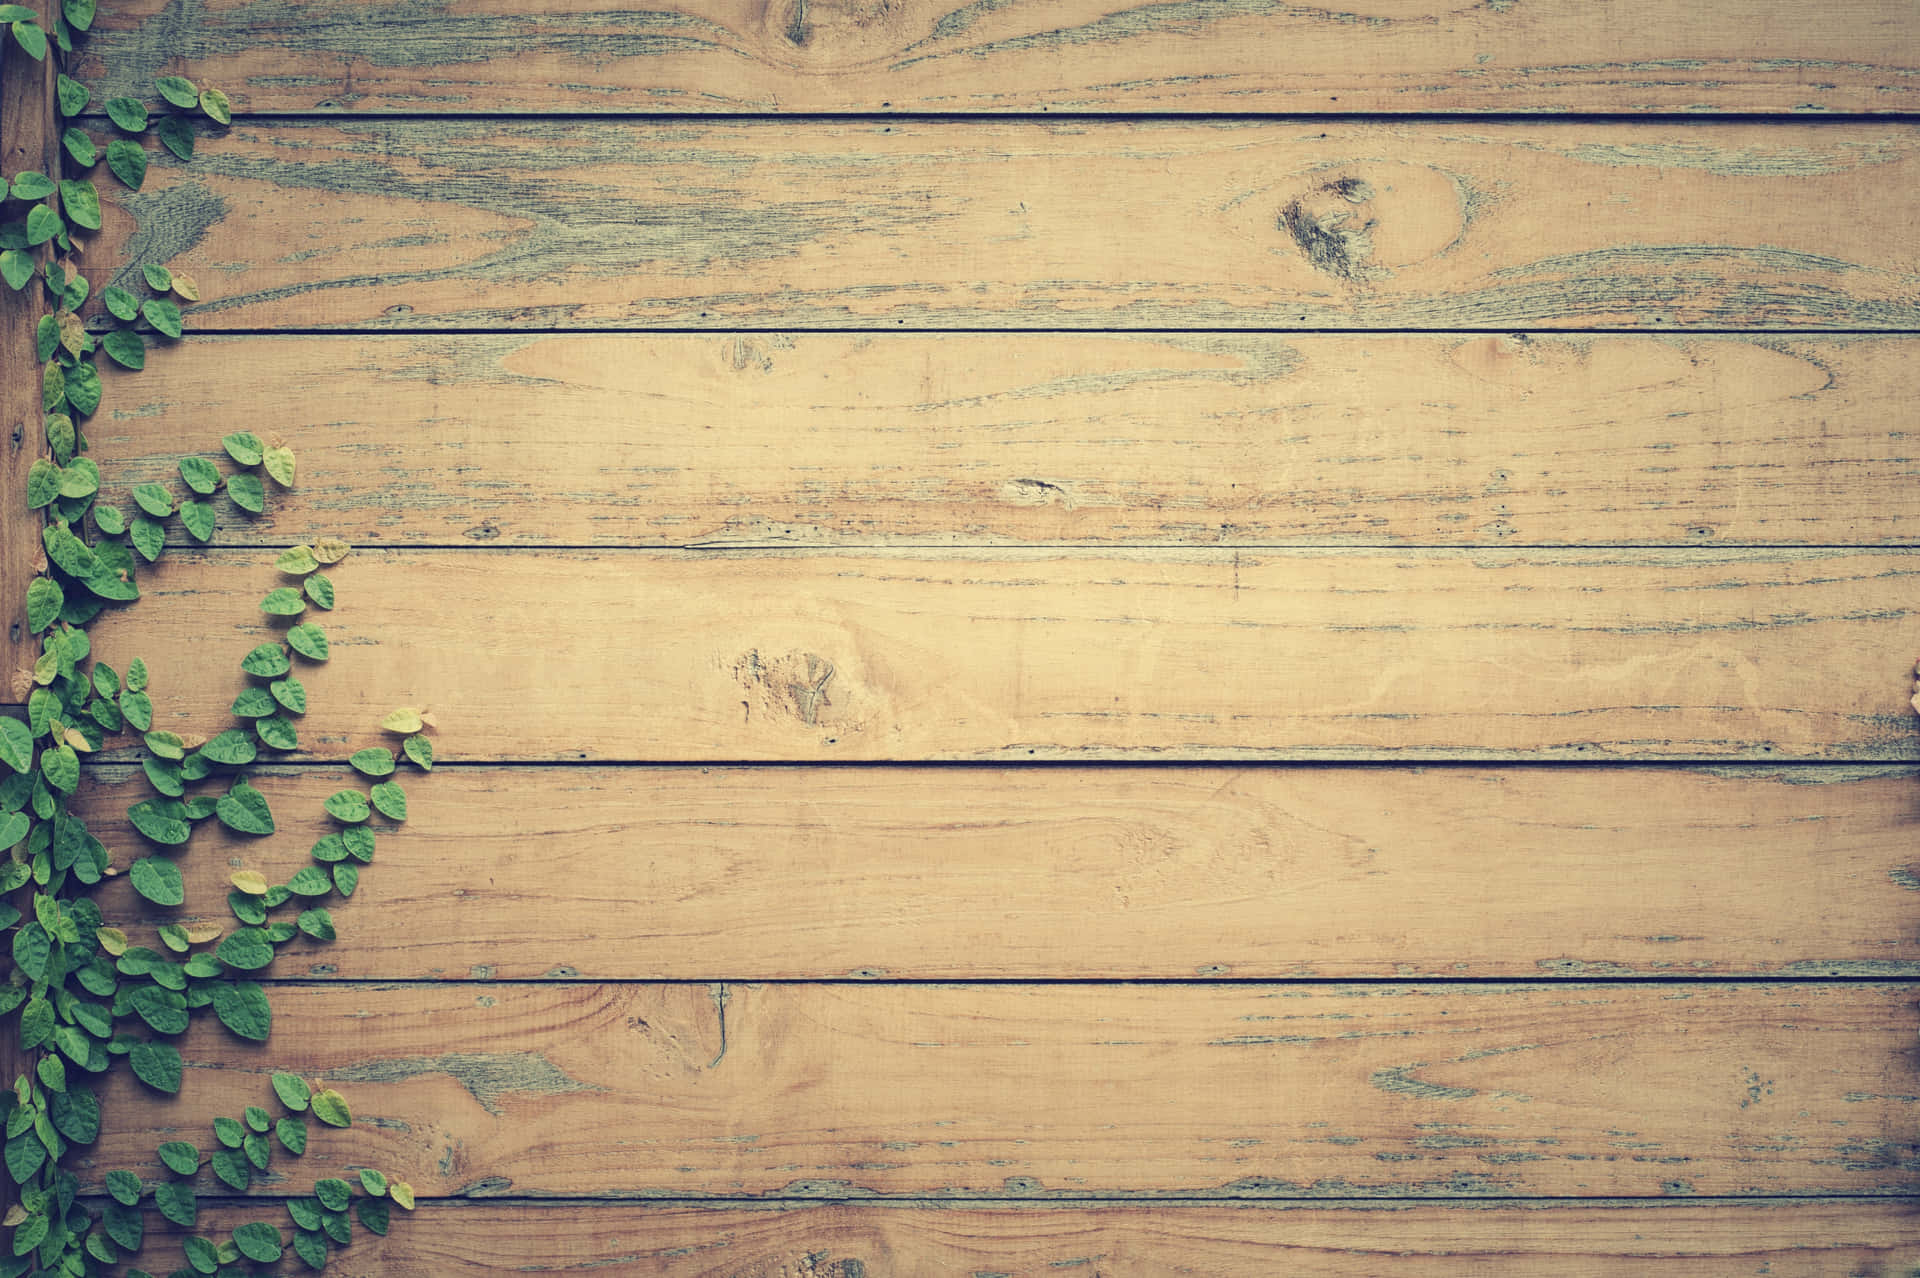 A Wooden Wall With A Plant Growing On It